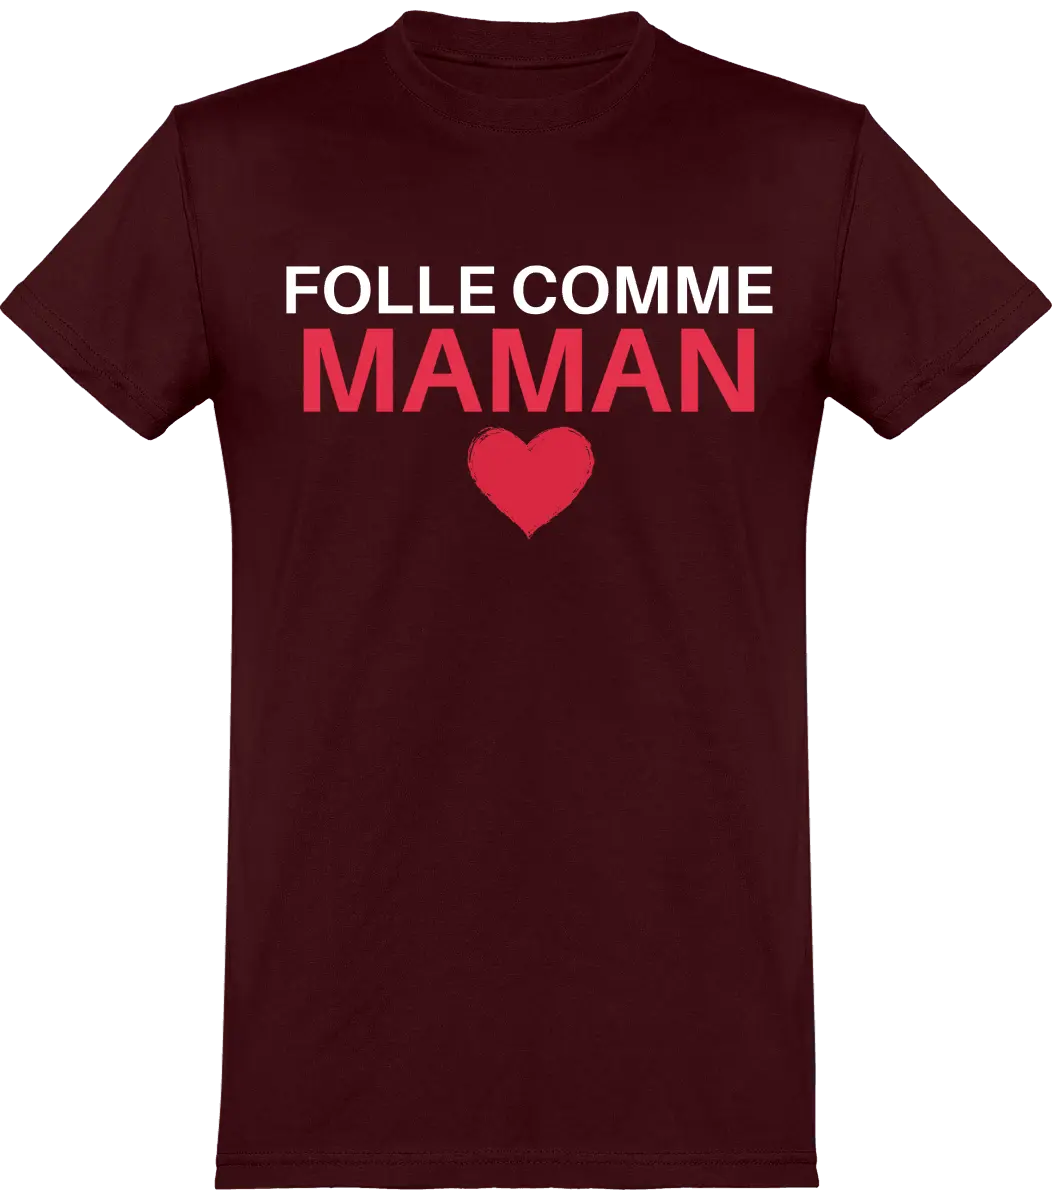 T-shirt maman "Folle comme maman" | Mixte - French Humour